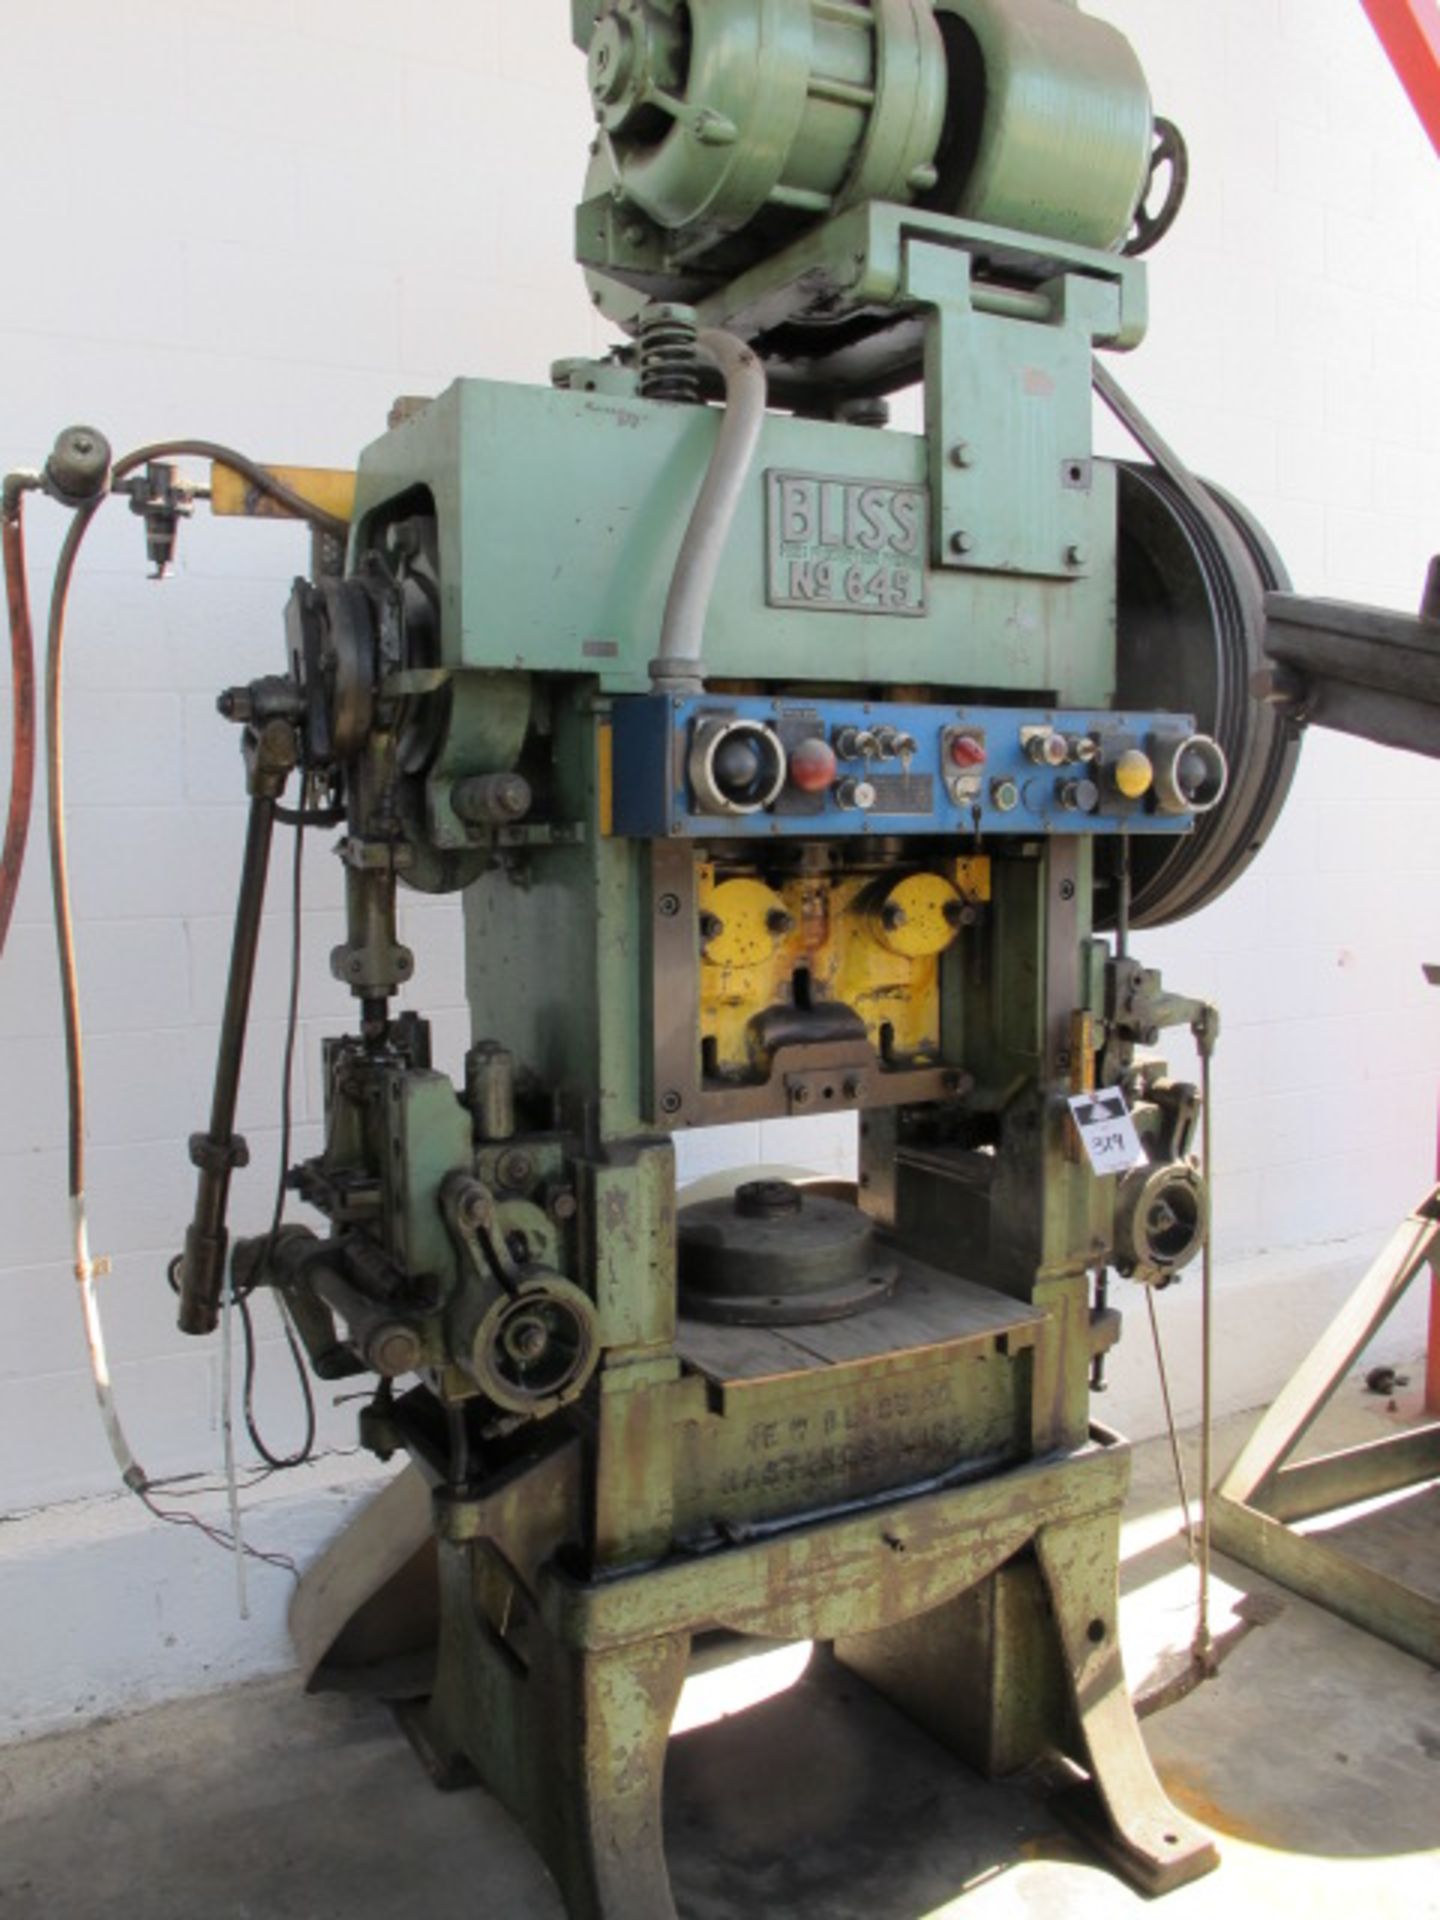 Bliss No. 645 High Production Stamping Press (NEEDS WORK)